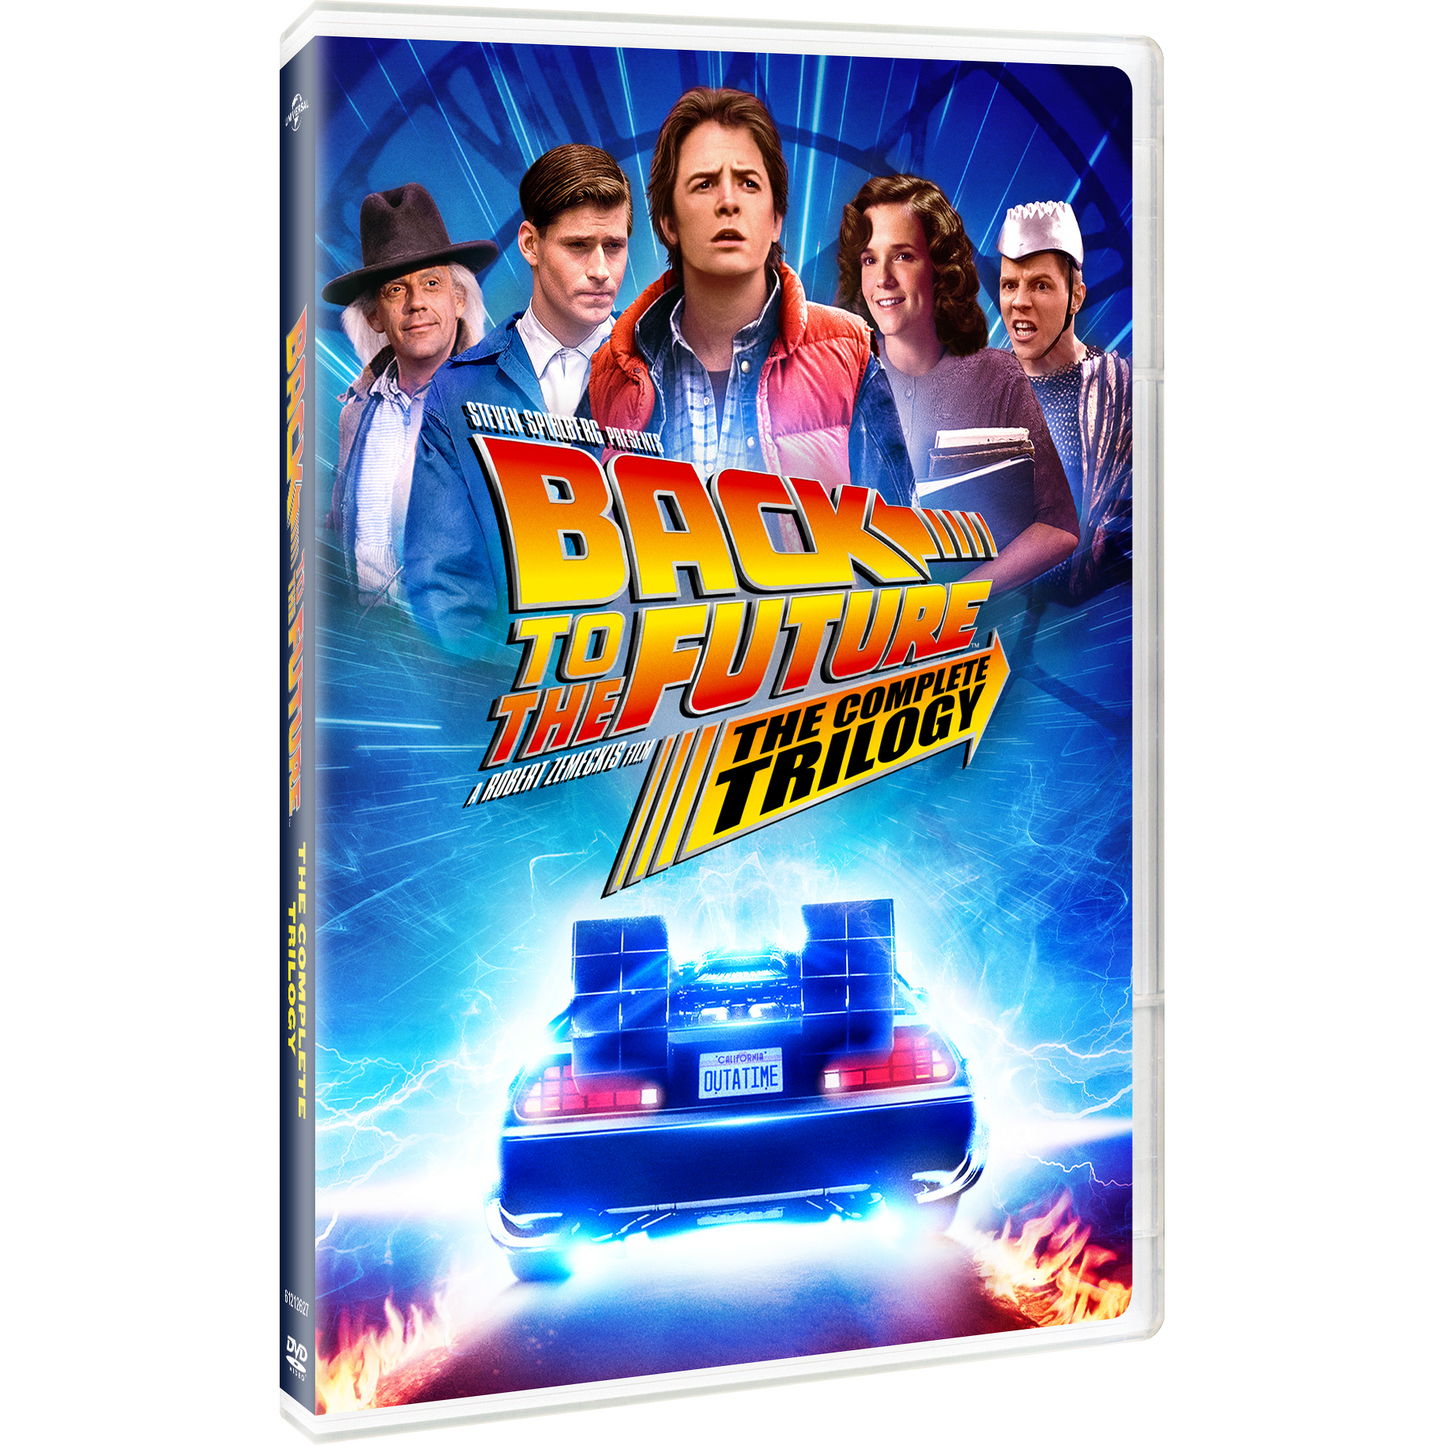 Back to the Future: The Complete Trilogy (DVD) [2020]